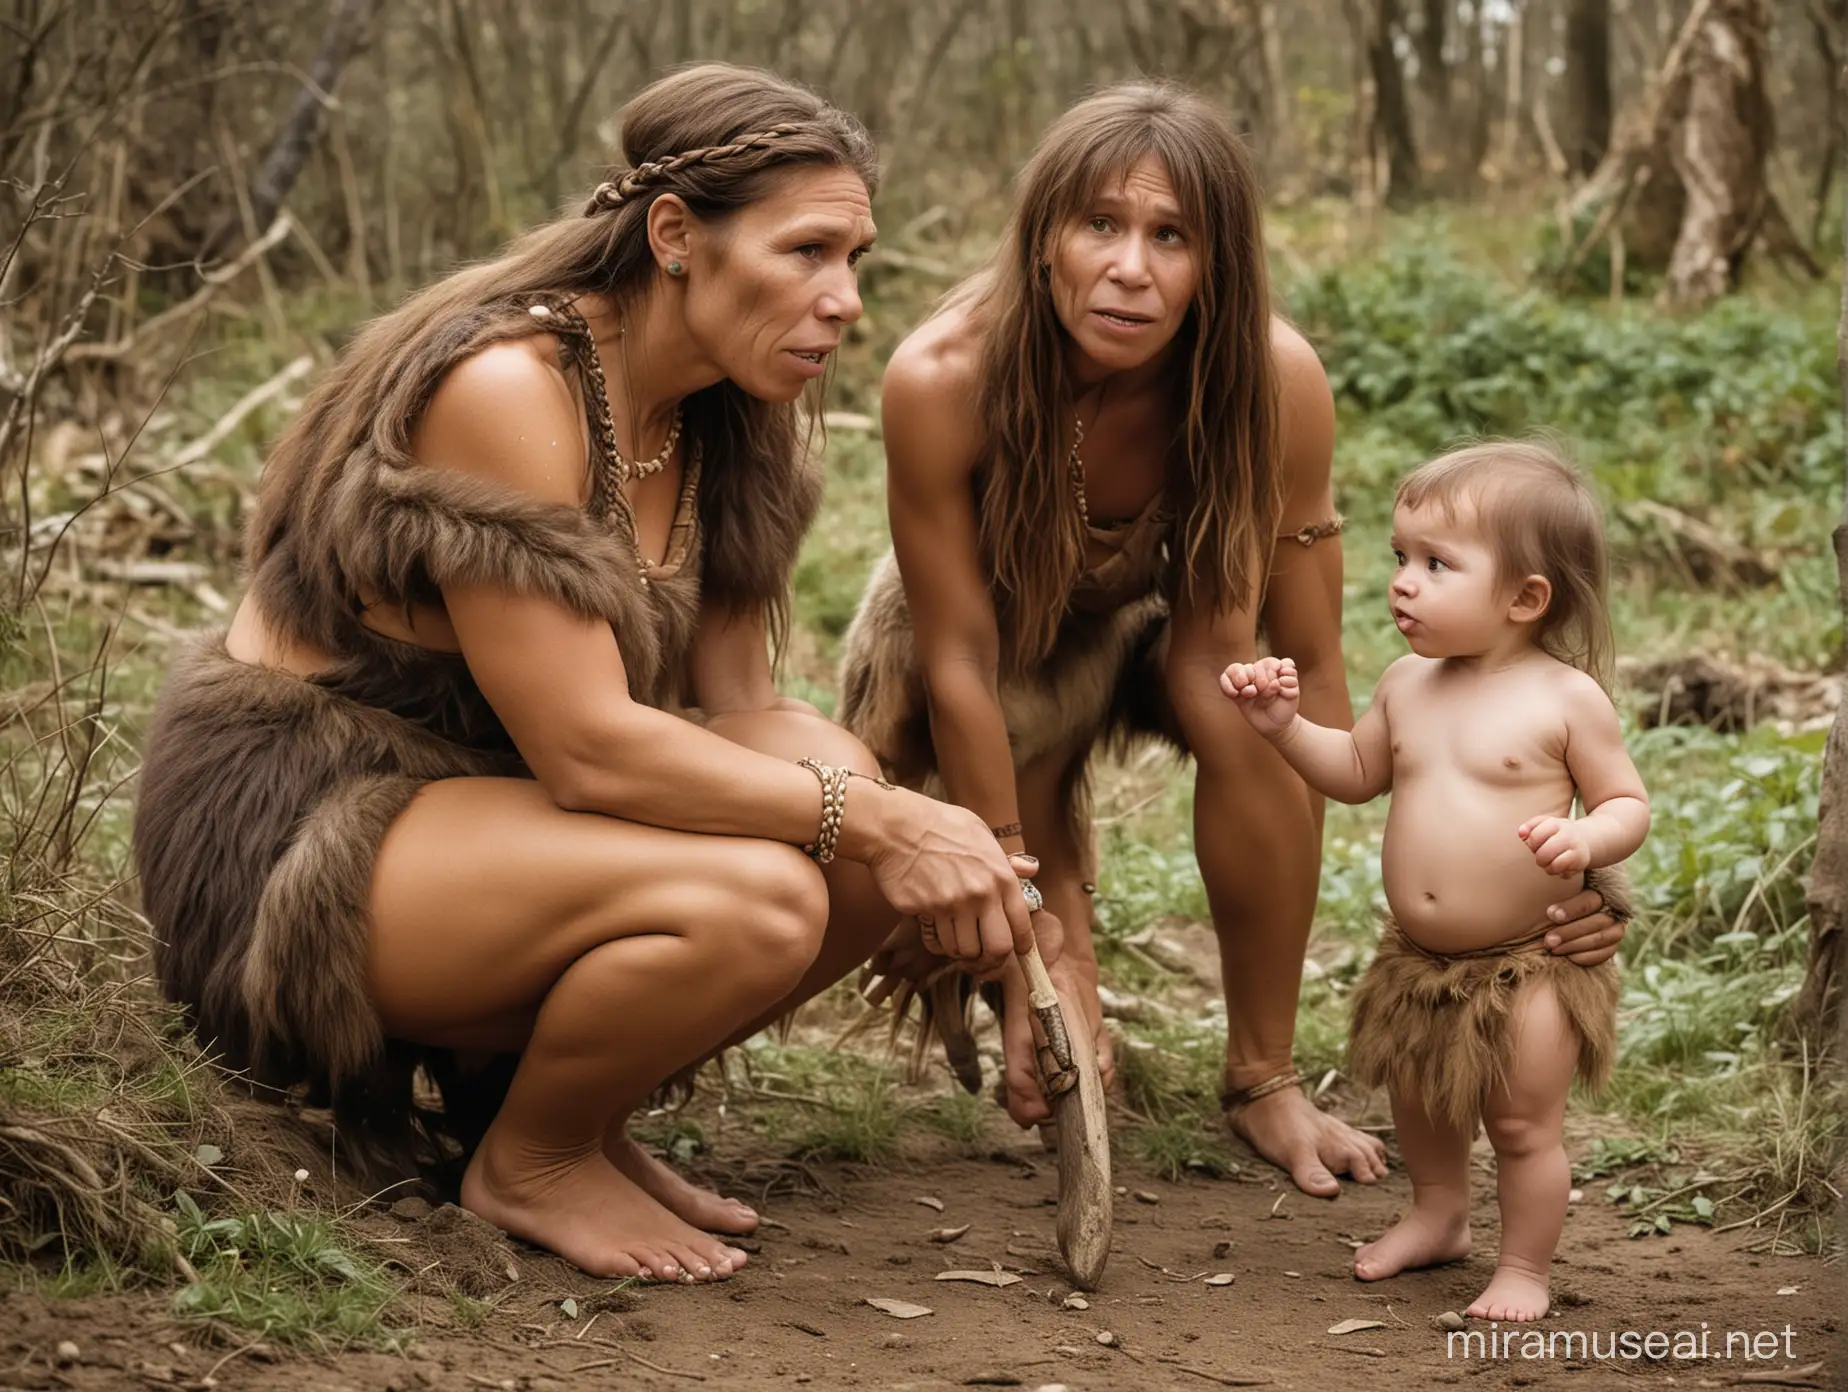 a Neanderthal woman with a small girl